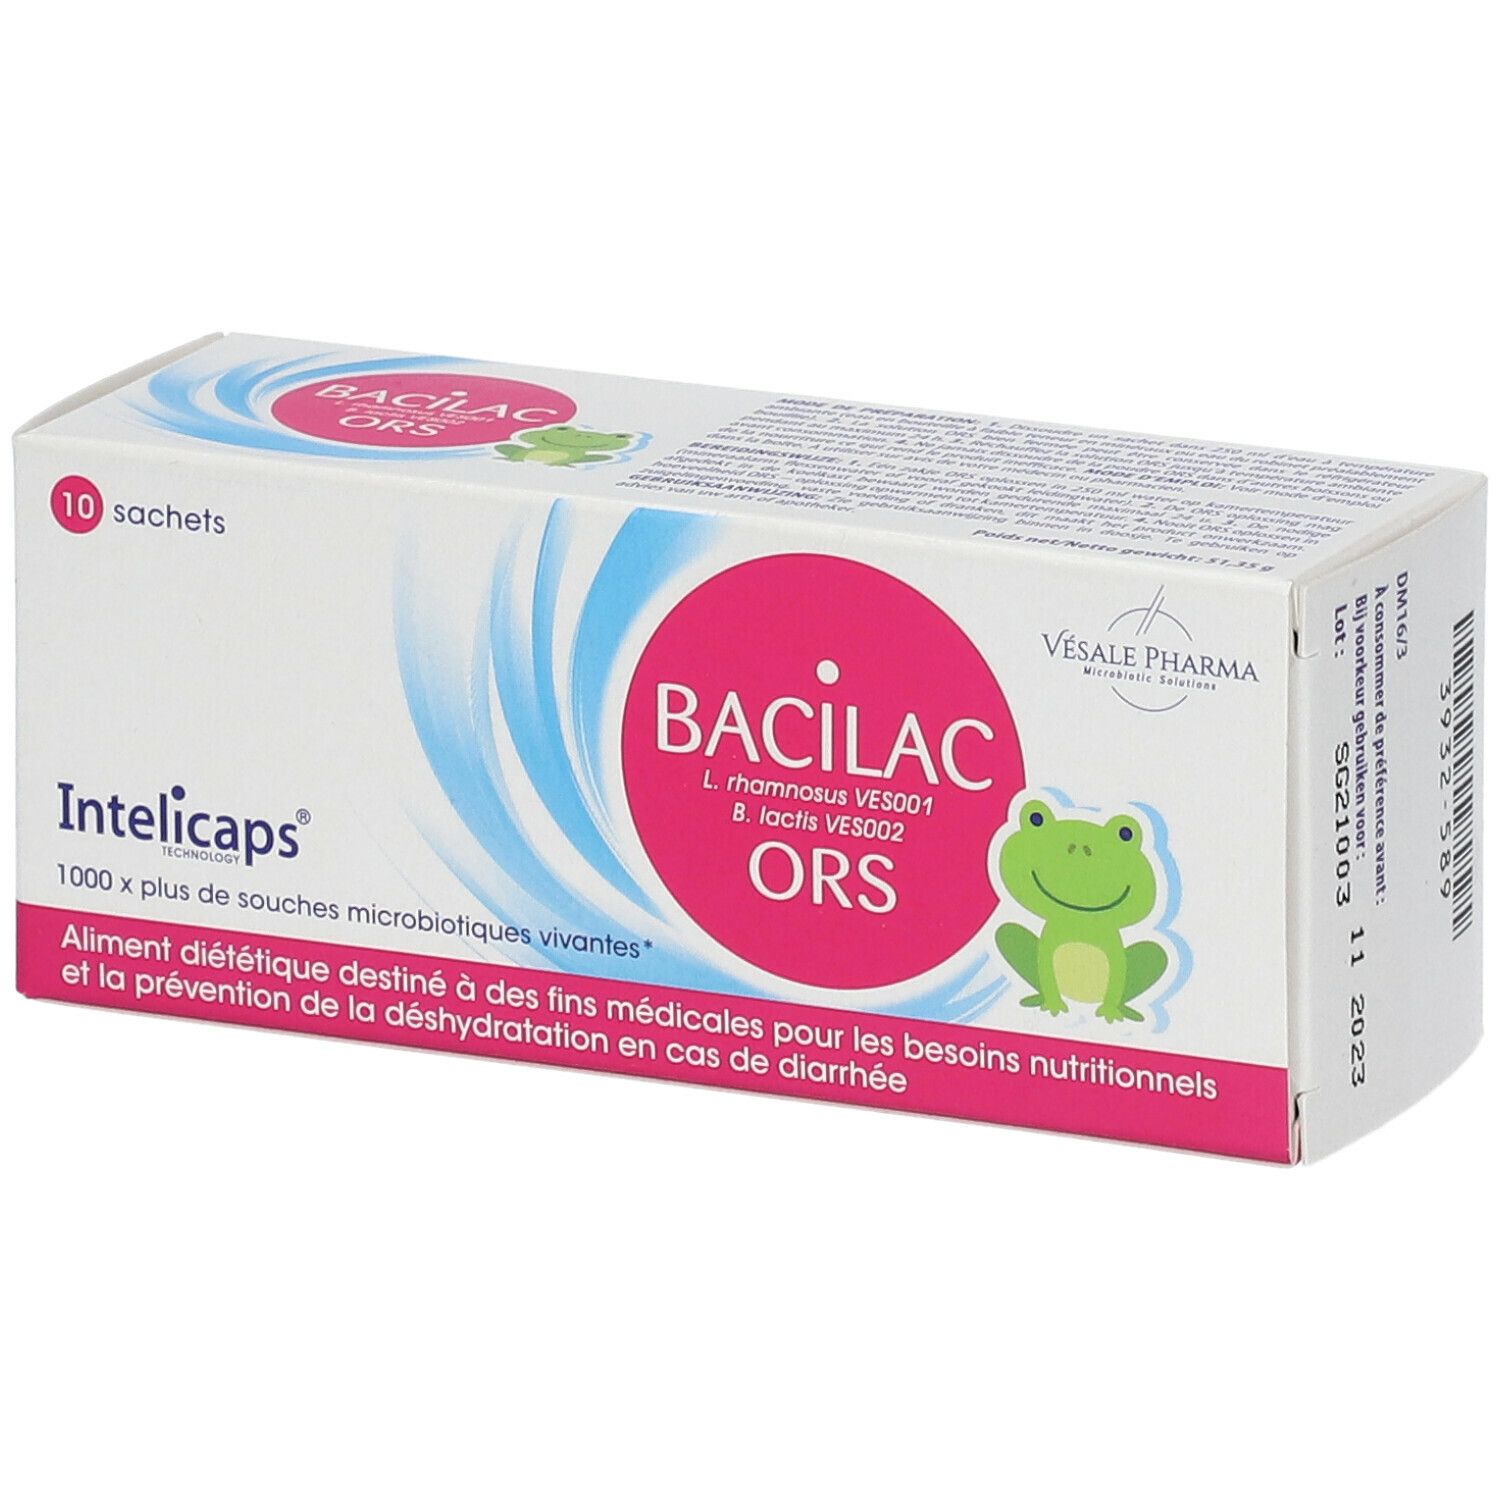 Image of Intelicaps® Bacilac ORS